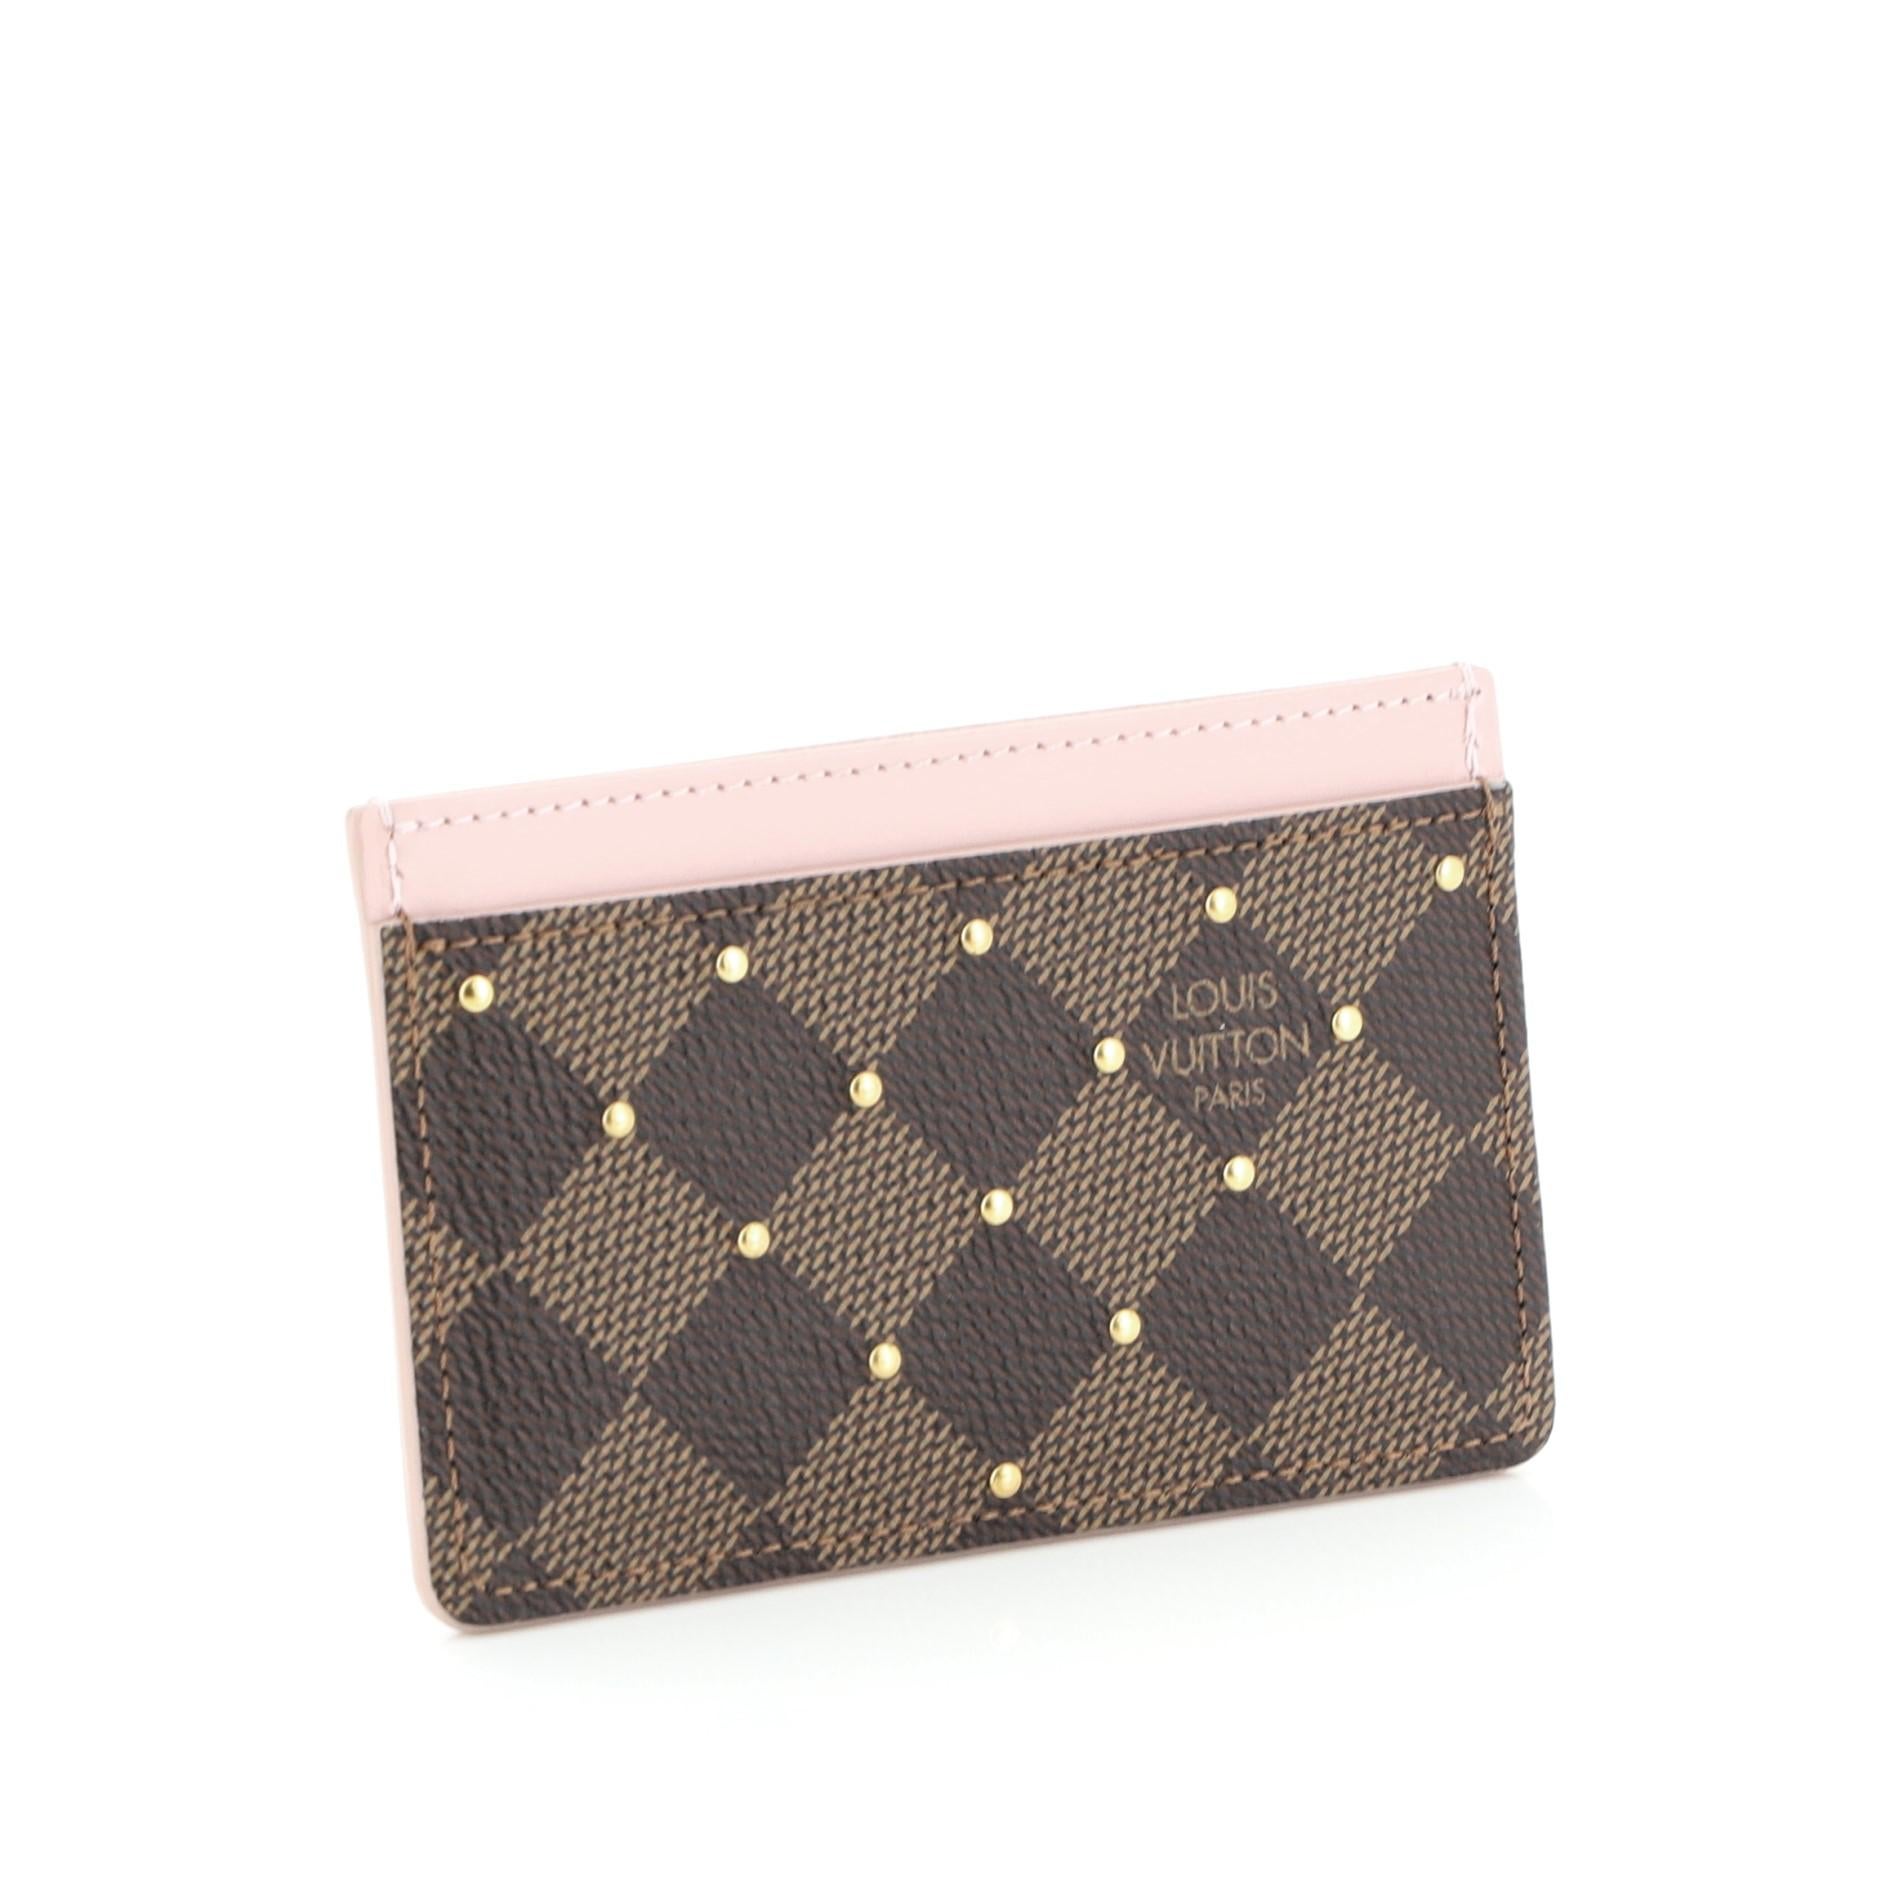 This Louis Vuitton Card Holder Studded Damier, crafted in damier ebene coated canvas, features a leather trim, stud detailing and gold-tone hardware. It opens to a pink leather interior. Authenticity code reads: CA1199. 

Condition: Great. Minor